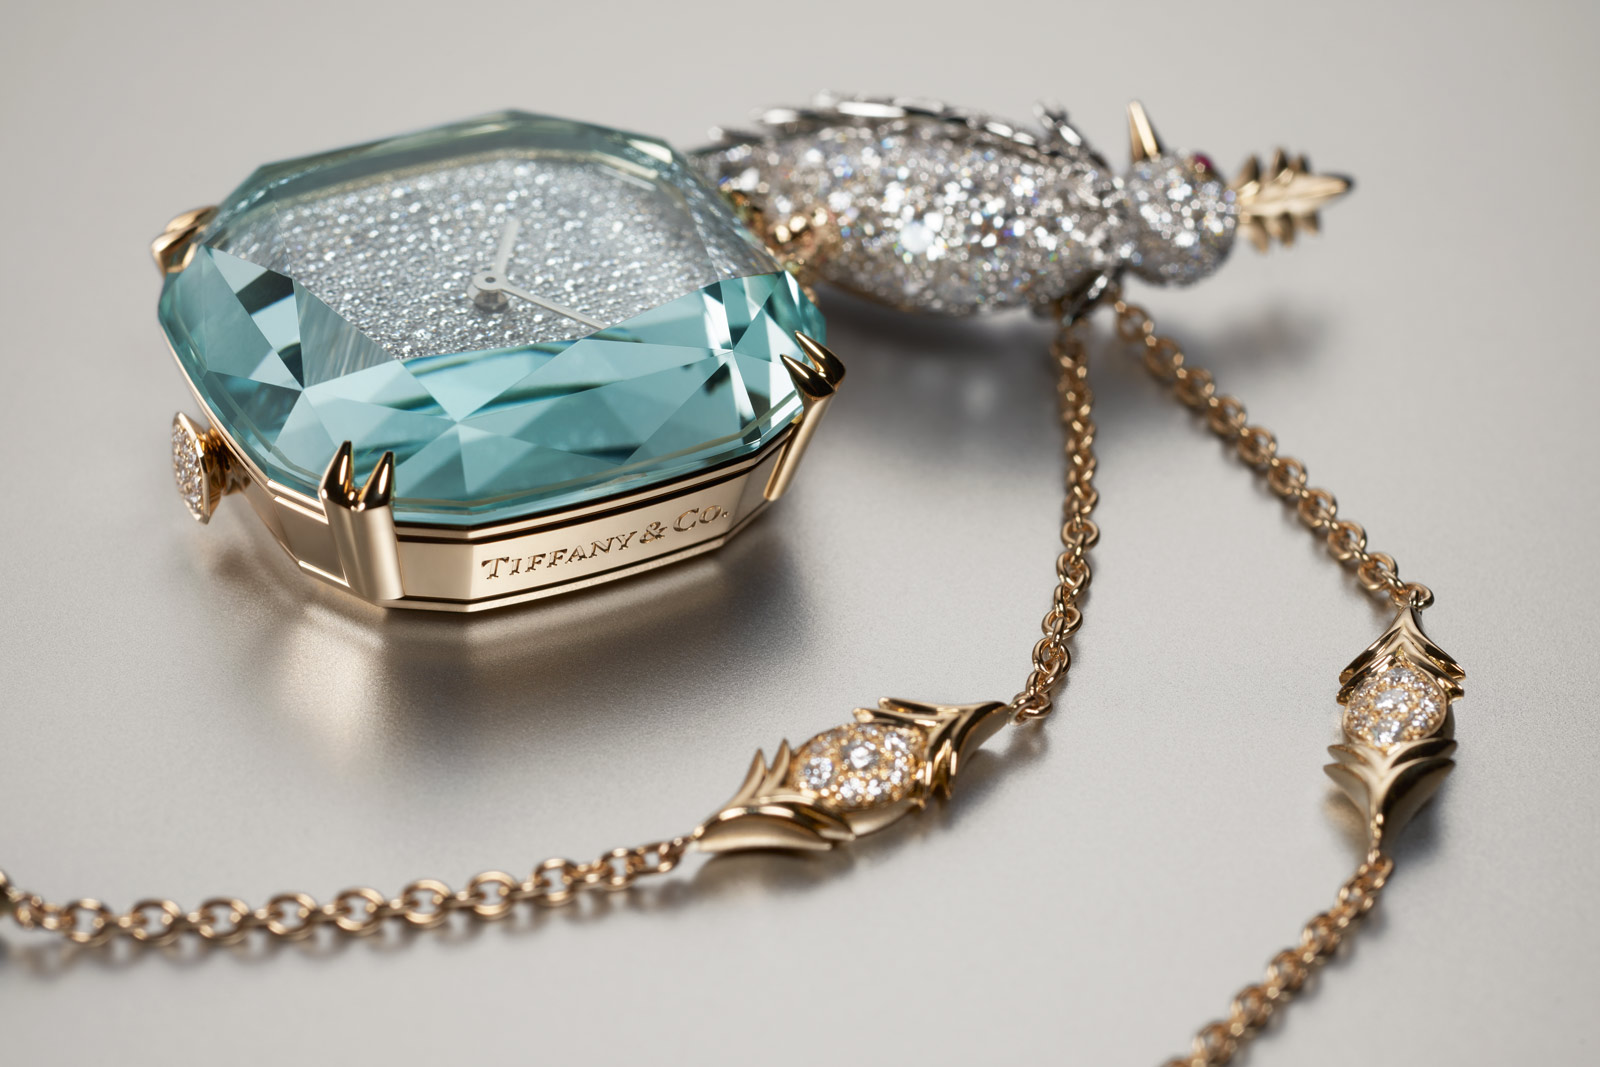 Tiffany & Co. and Richard Mille Debut Unique Pendant Watches for